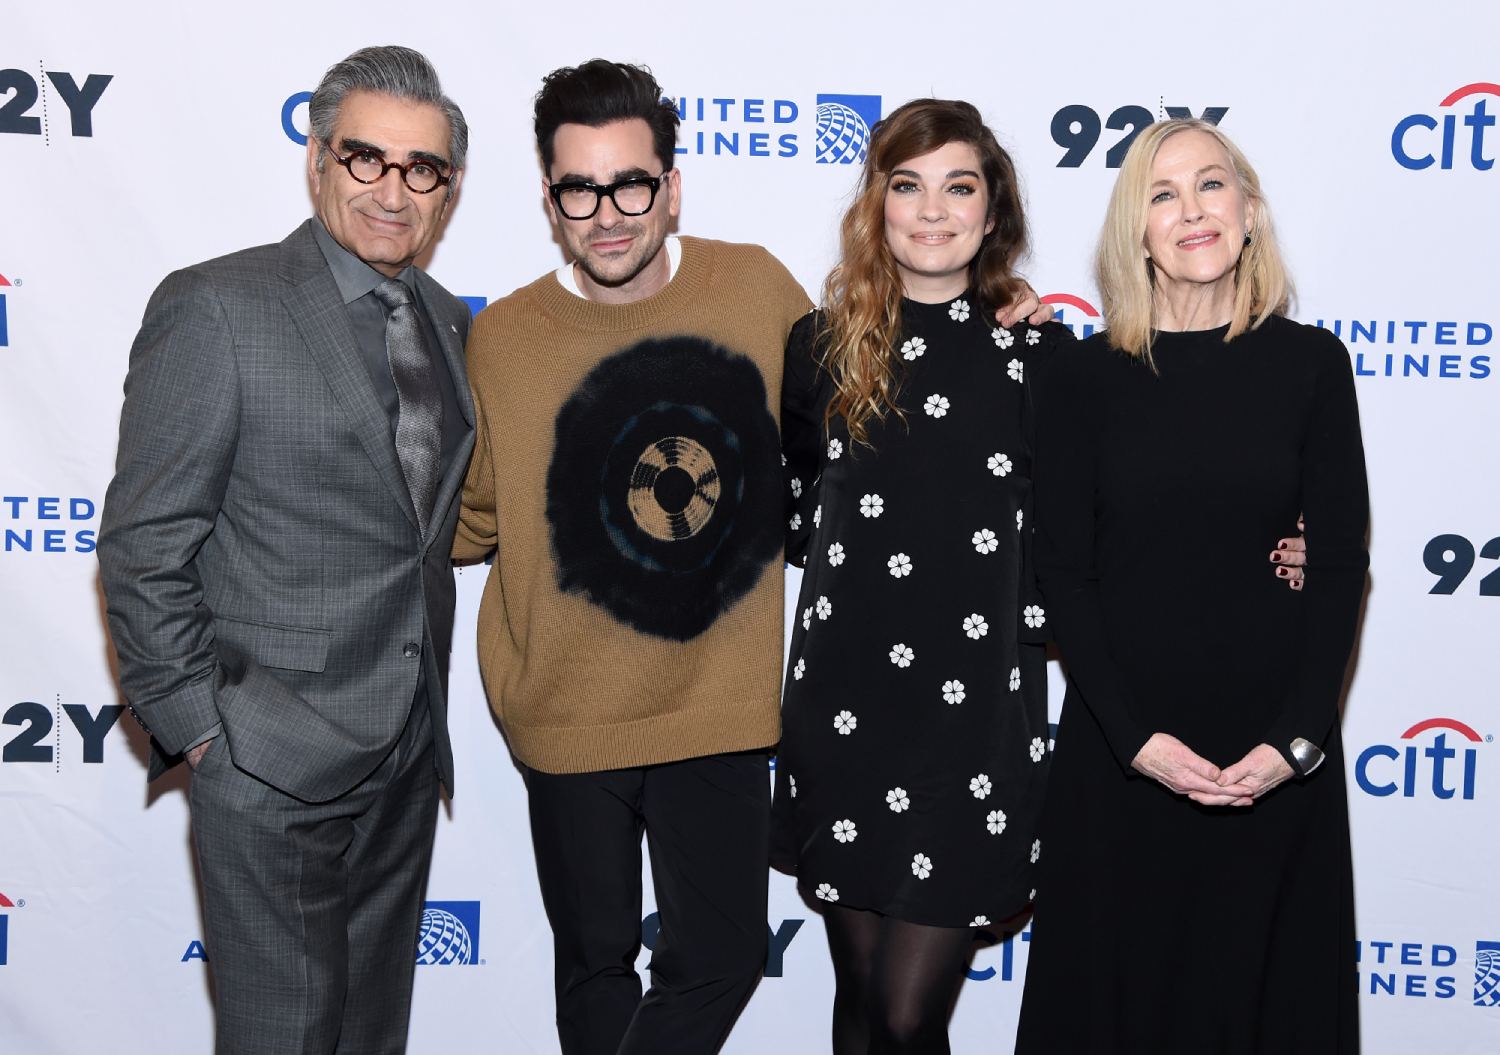 Which Schitts Creek Star Has the Highest Net Worth: Eugene Levy, Dan Levy, Annie Murphy, or Catherine OHara?